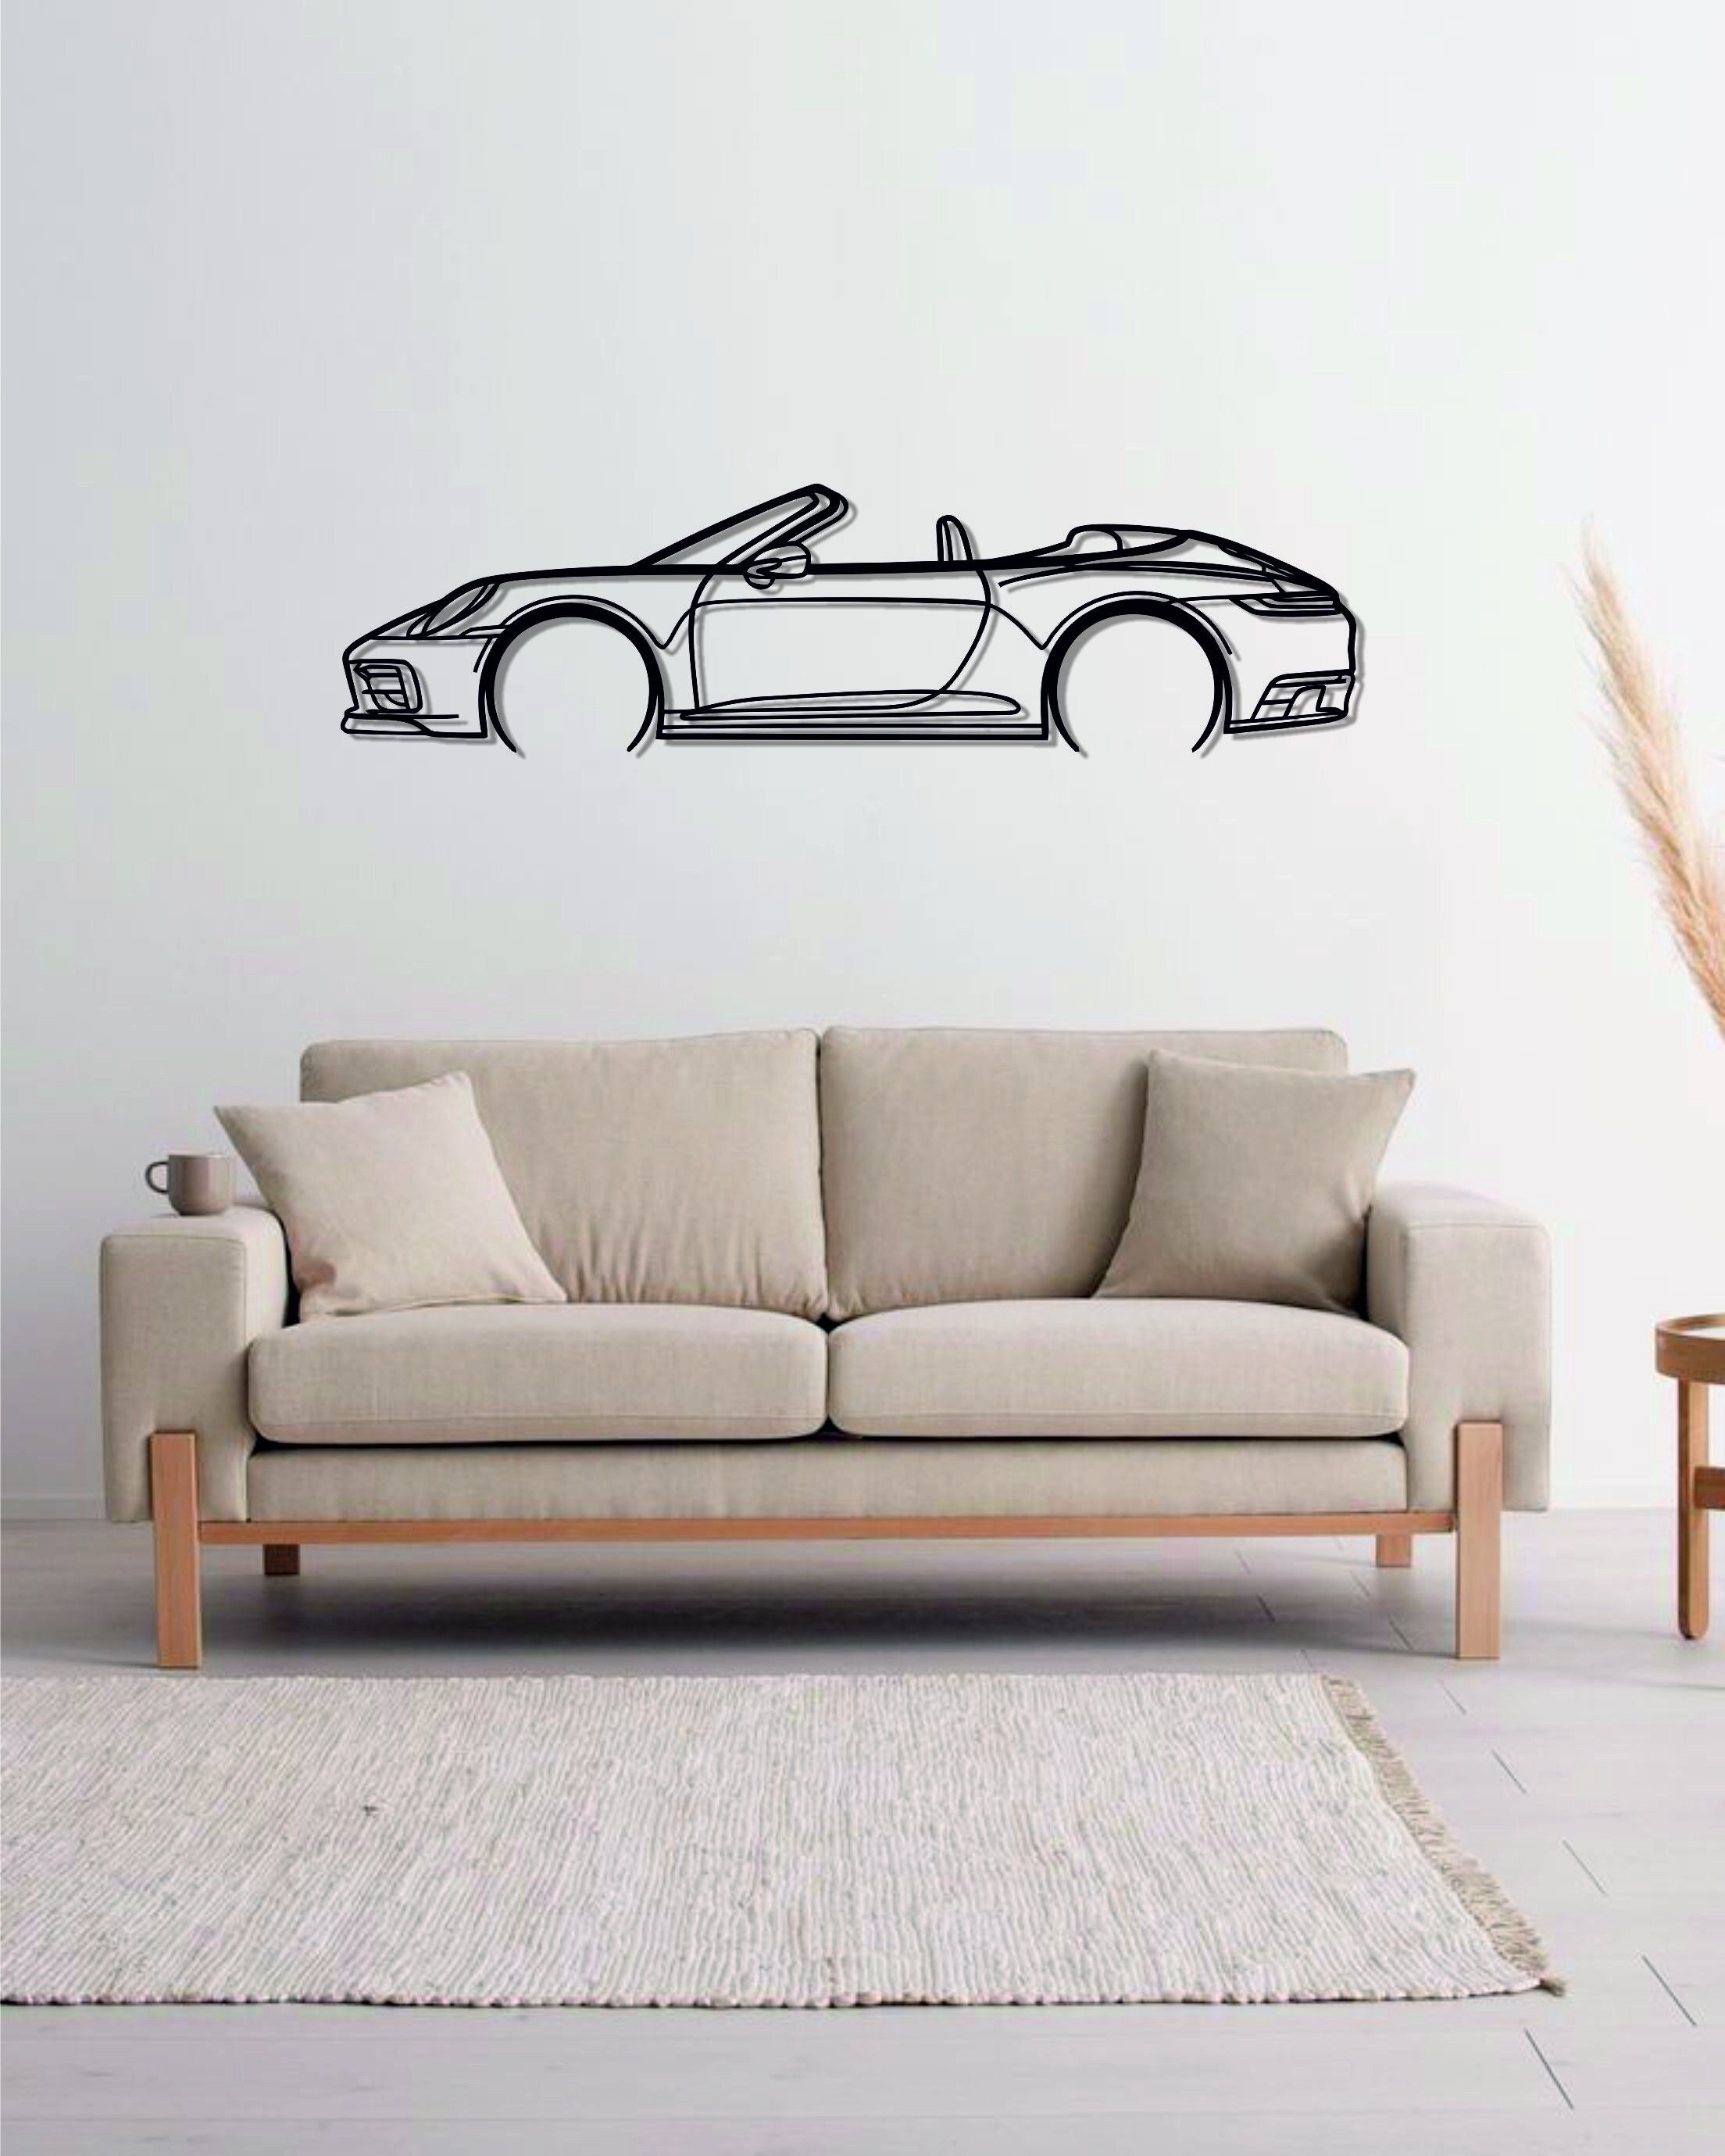 Car Guys Make the Best Dads Car Lovers Gifts Poster for Sale by  Nzgiftsandmore